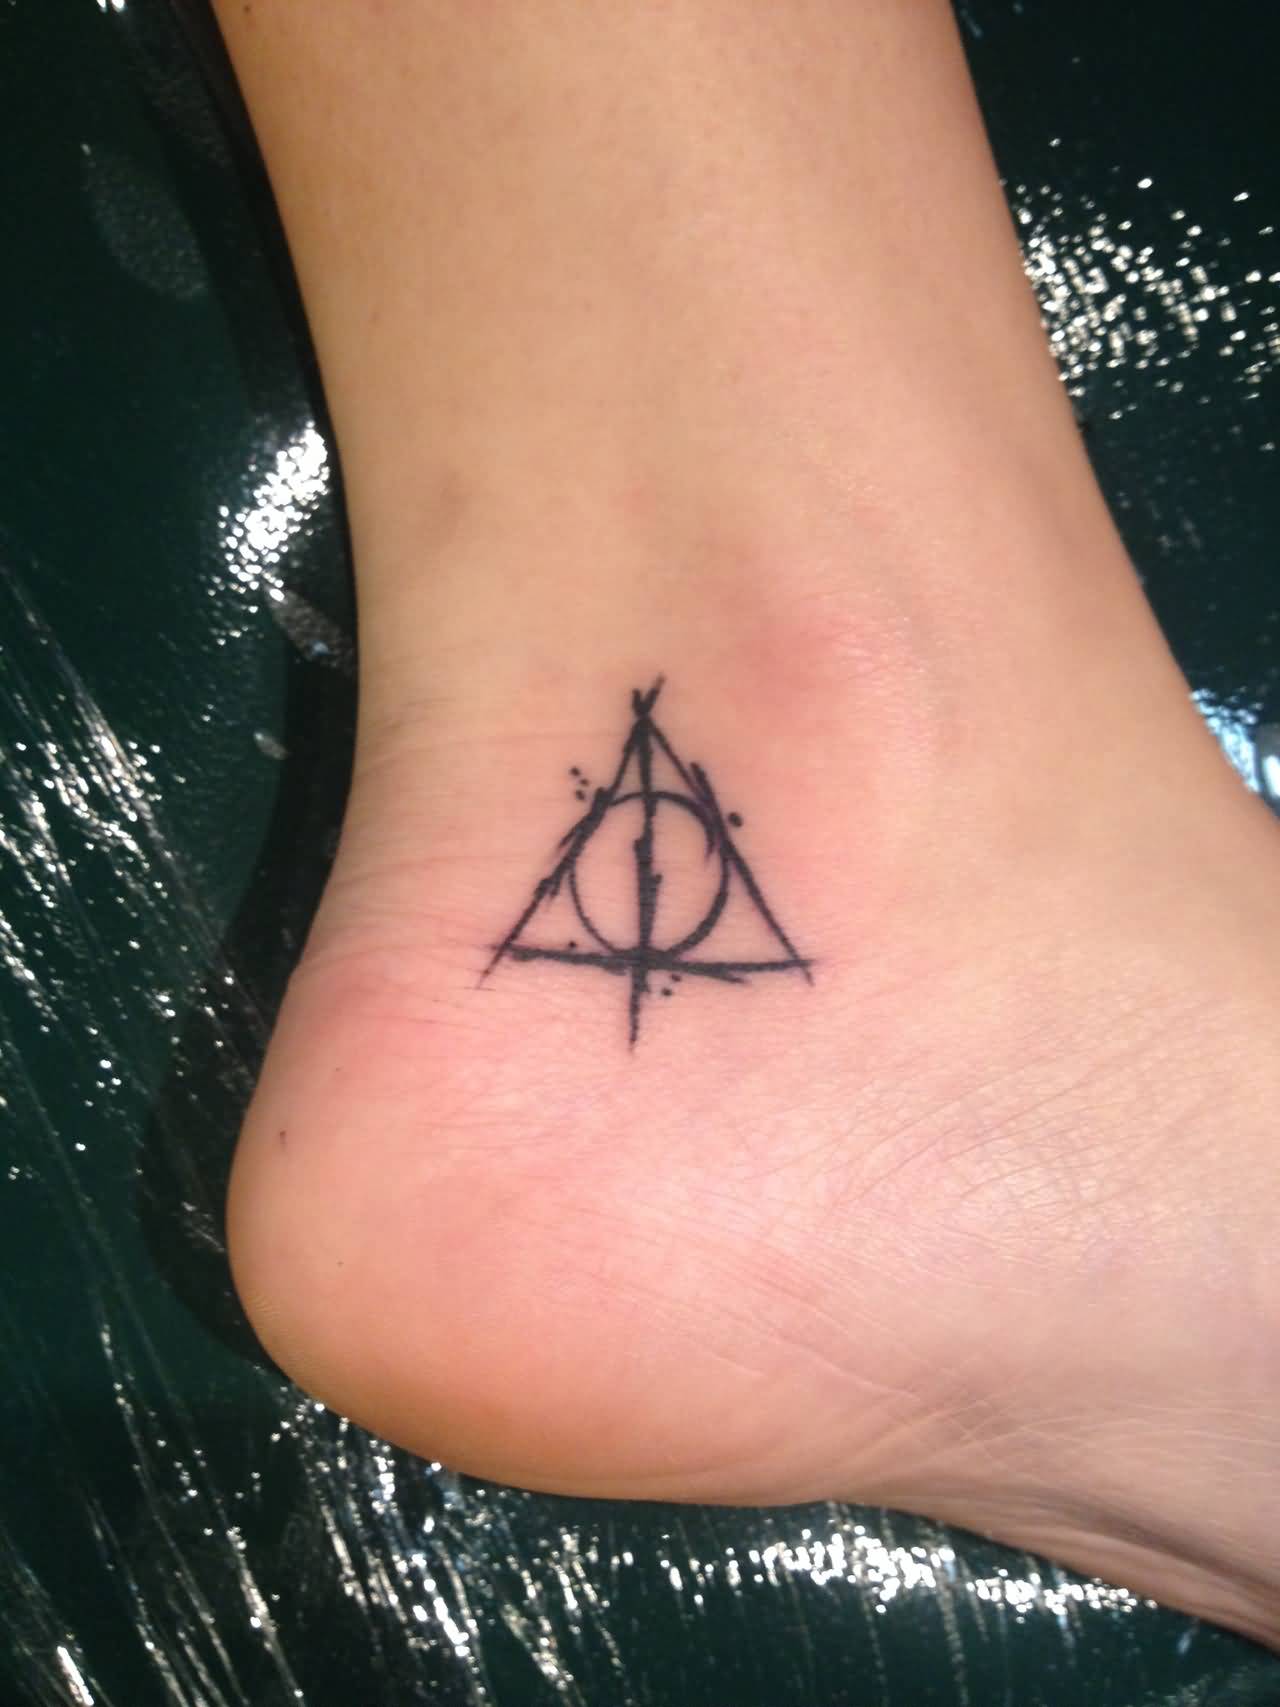 Small Nicely Made Hallows Tattoo On Ankle